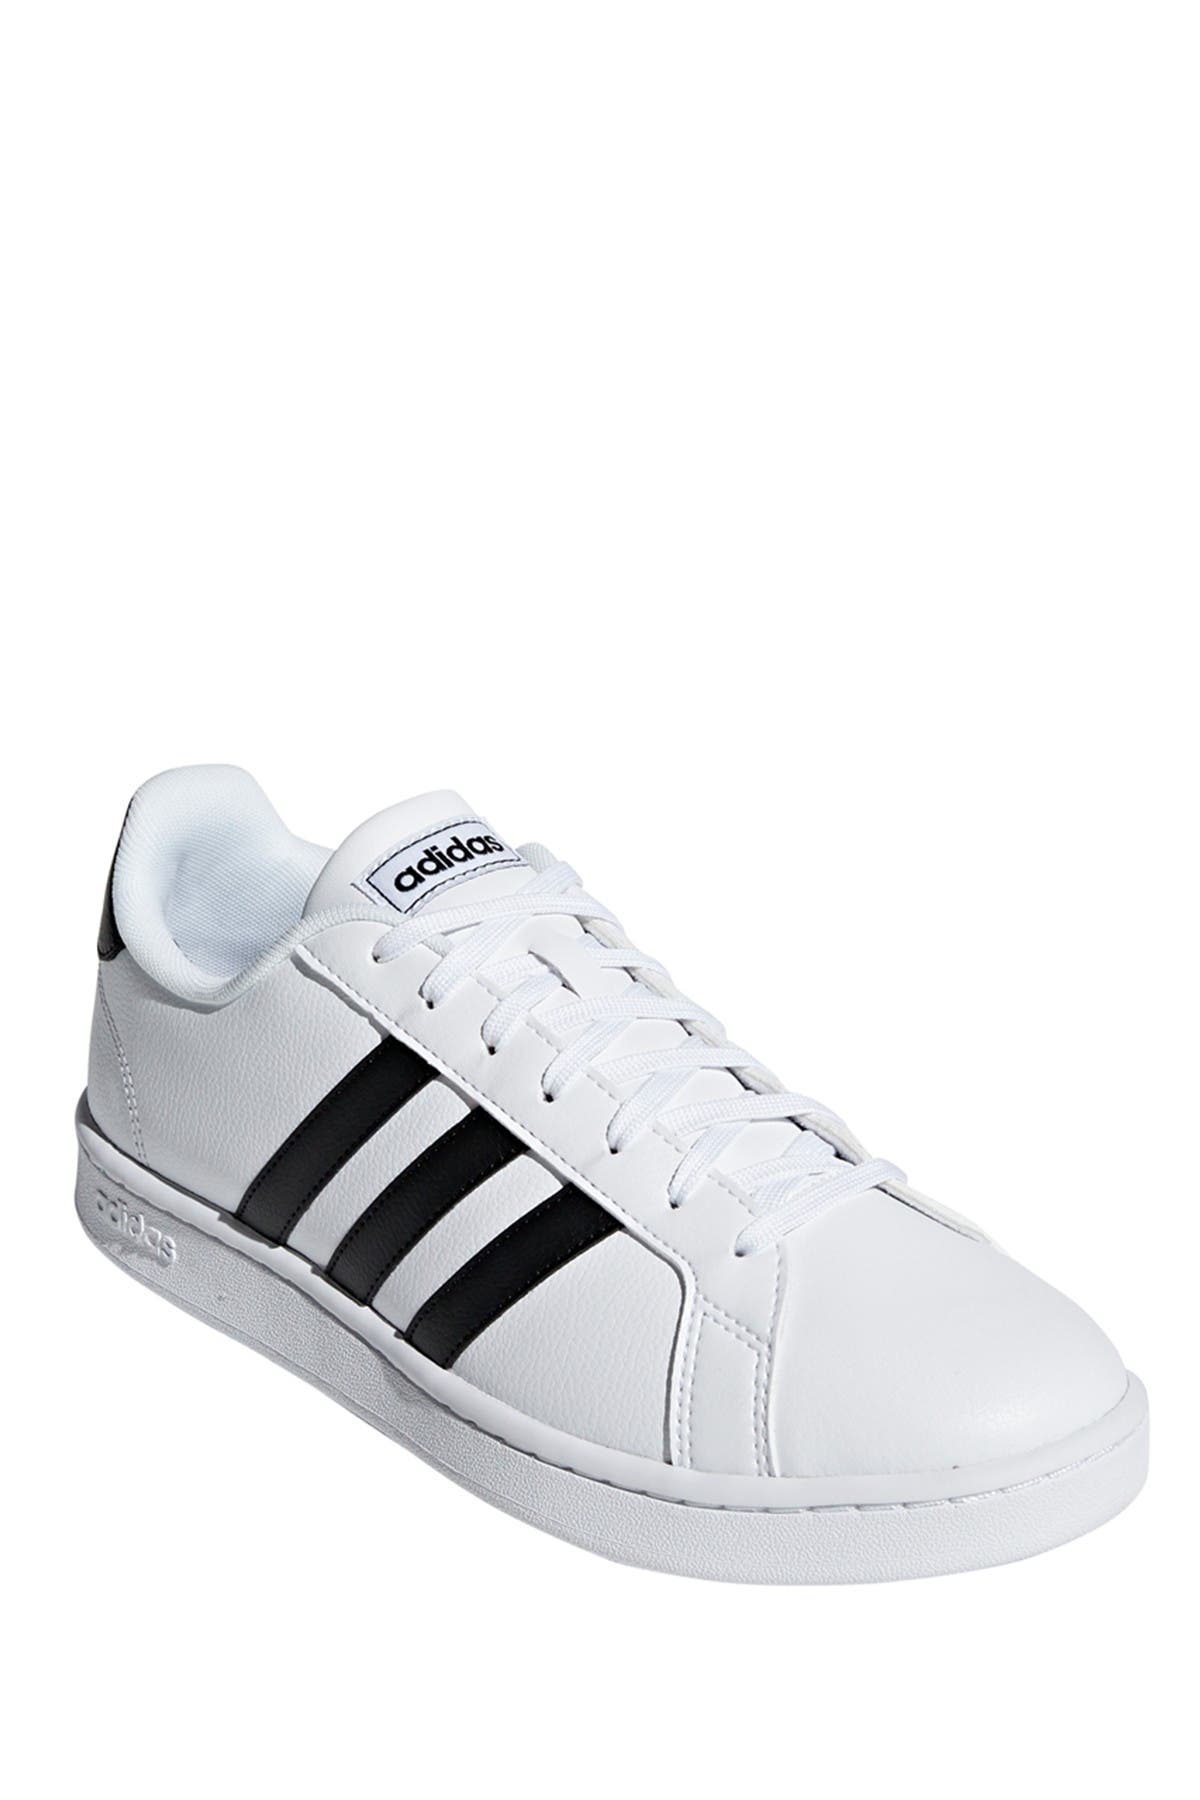 nordstrom rack womens adidas shoes